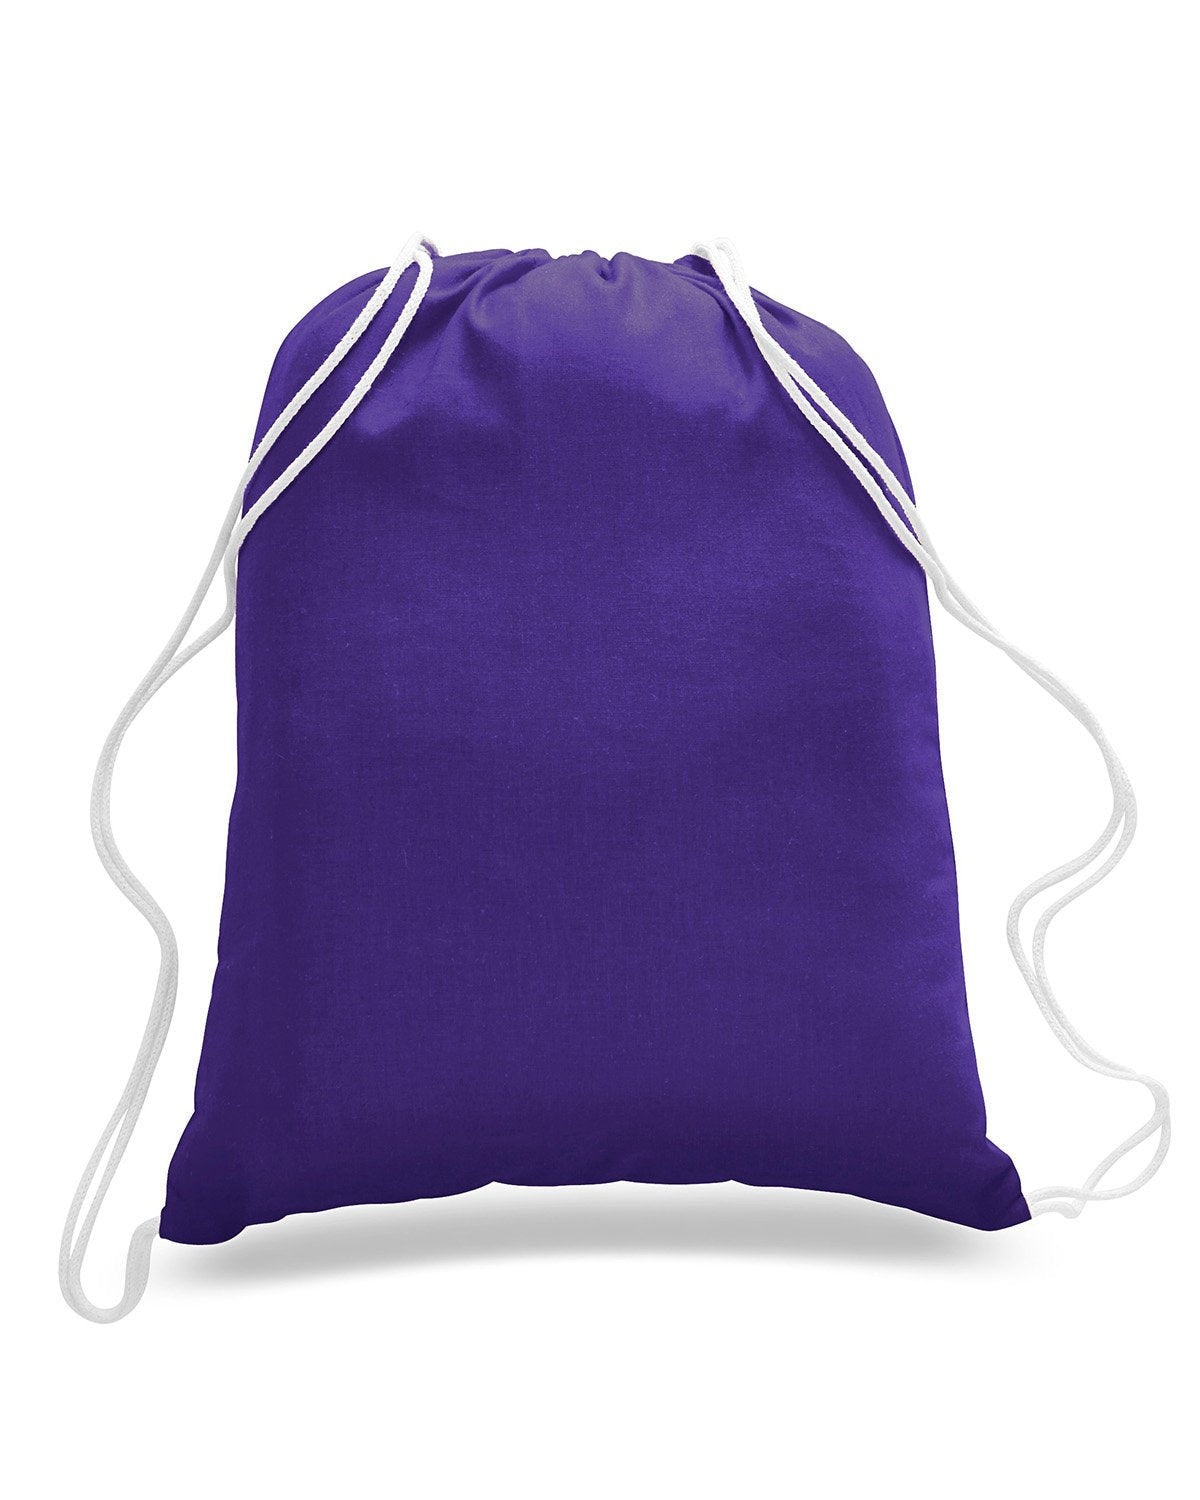 OAD101-OAD-PURPLE-OAD-Bags and Accessories-1